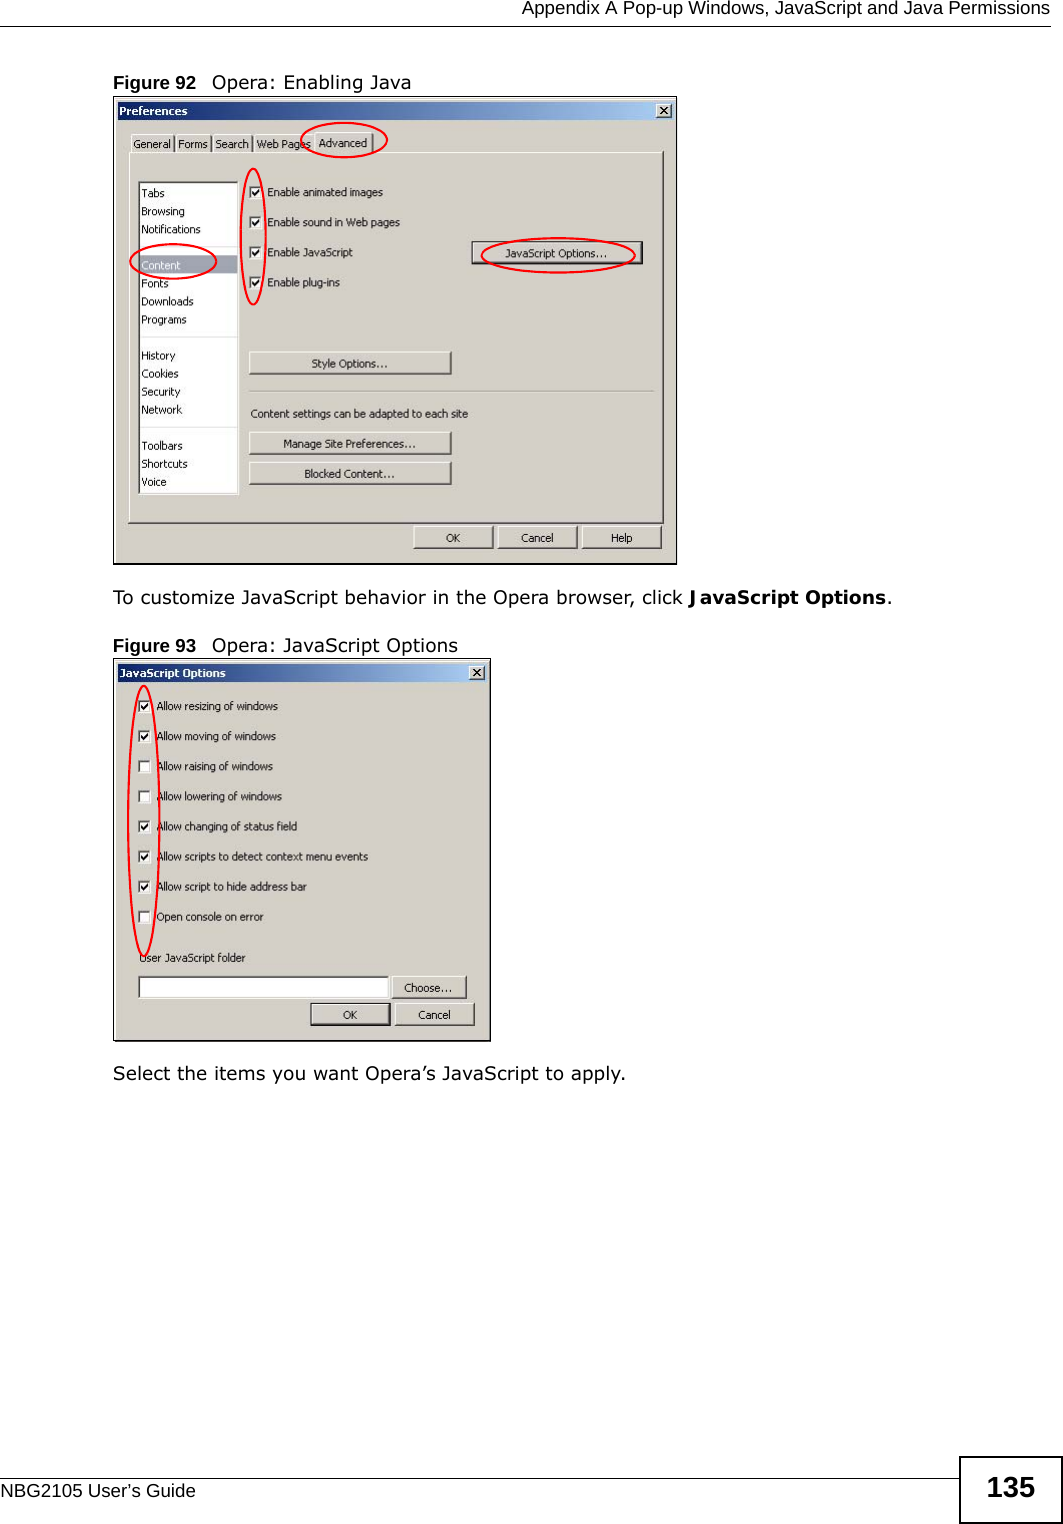  Appendix A Pop-up Windows, JavaScript and Java PermissionsNBG2105 User’s Guide 135Figure 92   Opera: Enabling JavaTo customize JavaScript behavior in the Opera browser, click JavaScript Options. Figure 93   Opera: JavaScript OptionsSelect the items you want Opera’s JavaScript to apply.